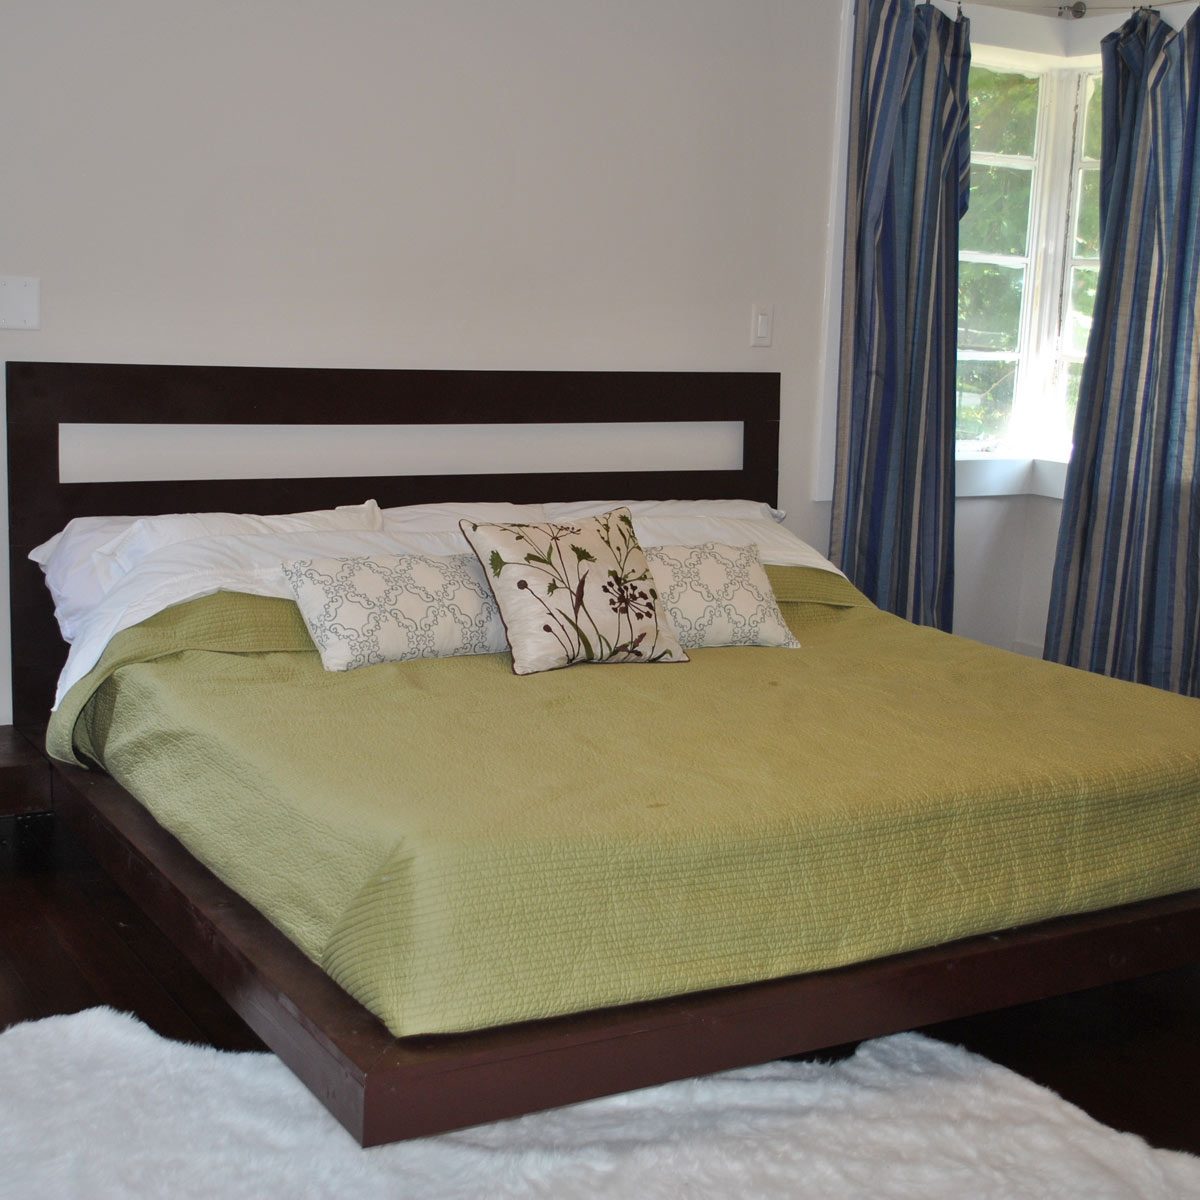 10 Awesome DIY Platform Bed  Designs   The Family Handyman